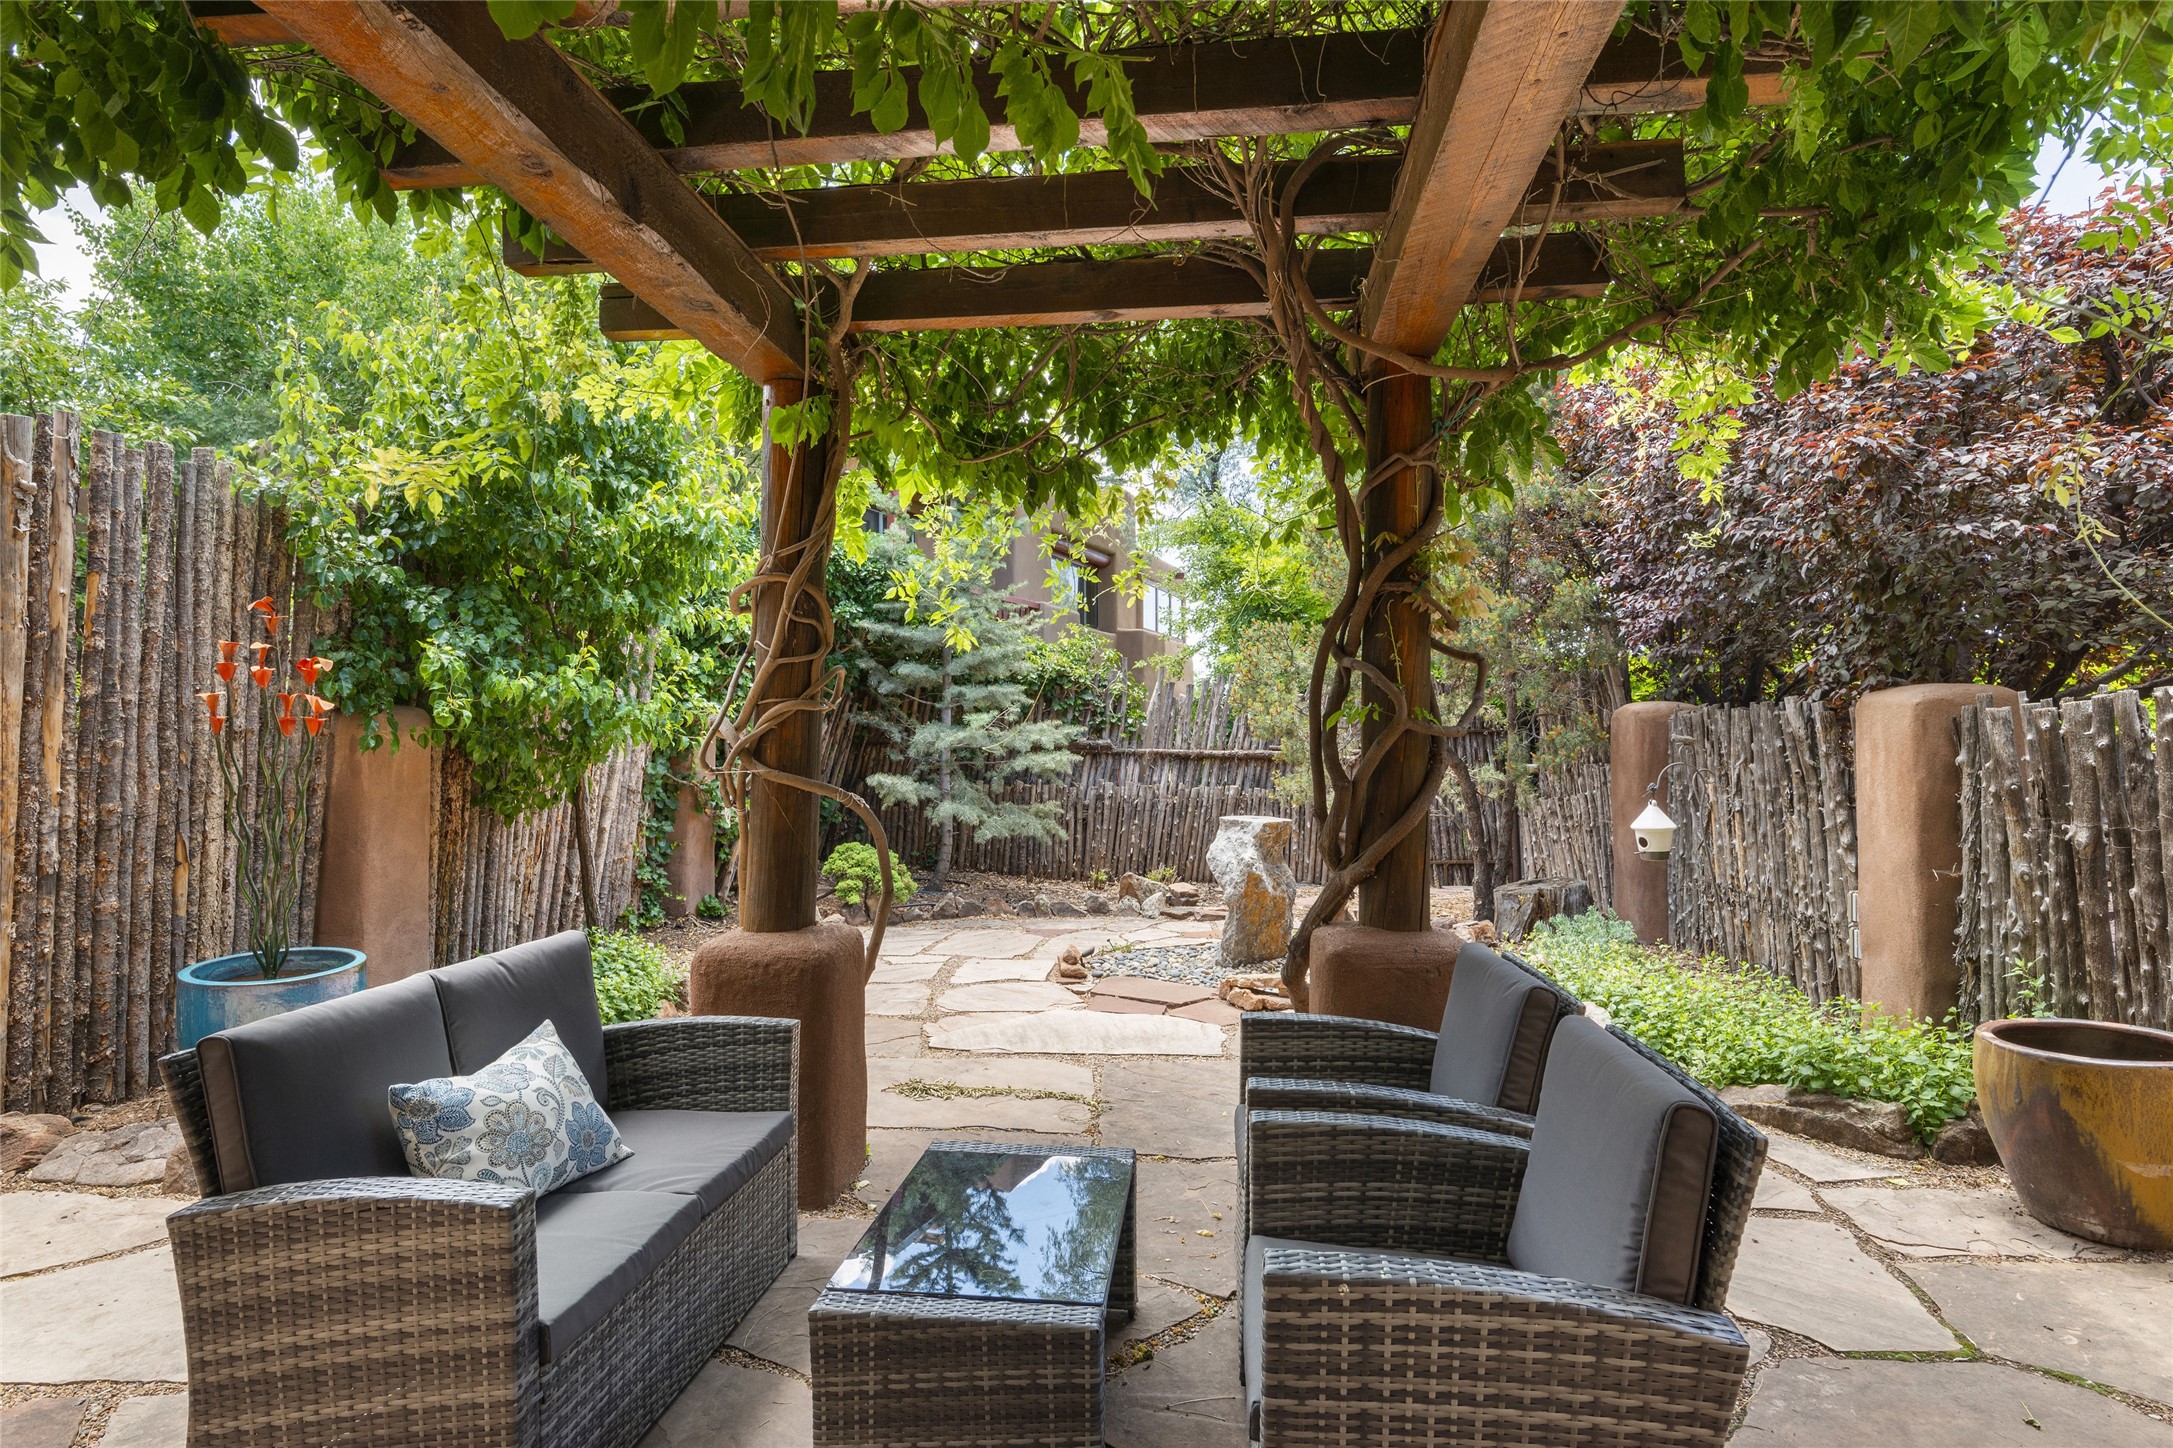 Private garden to relax under the blue wisteria